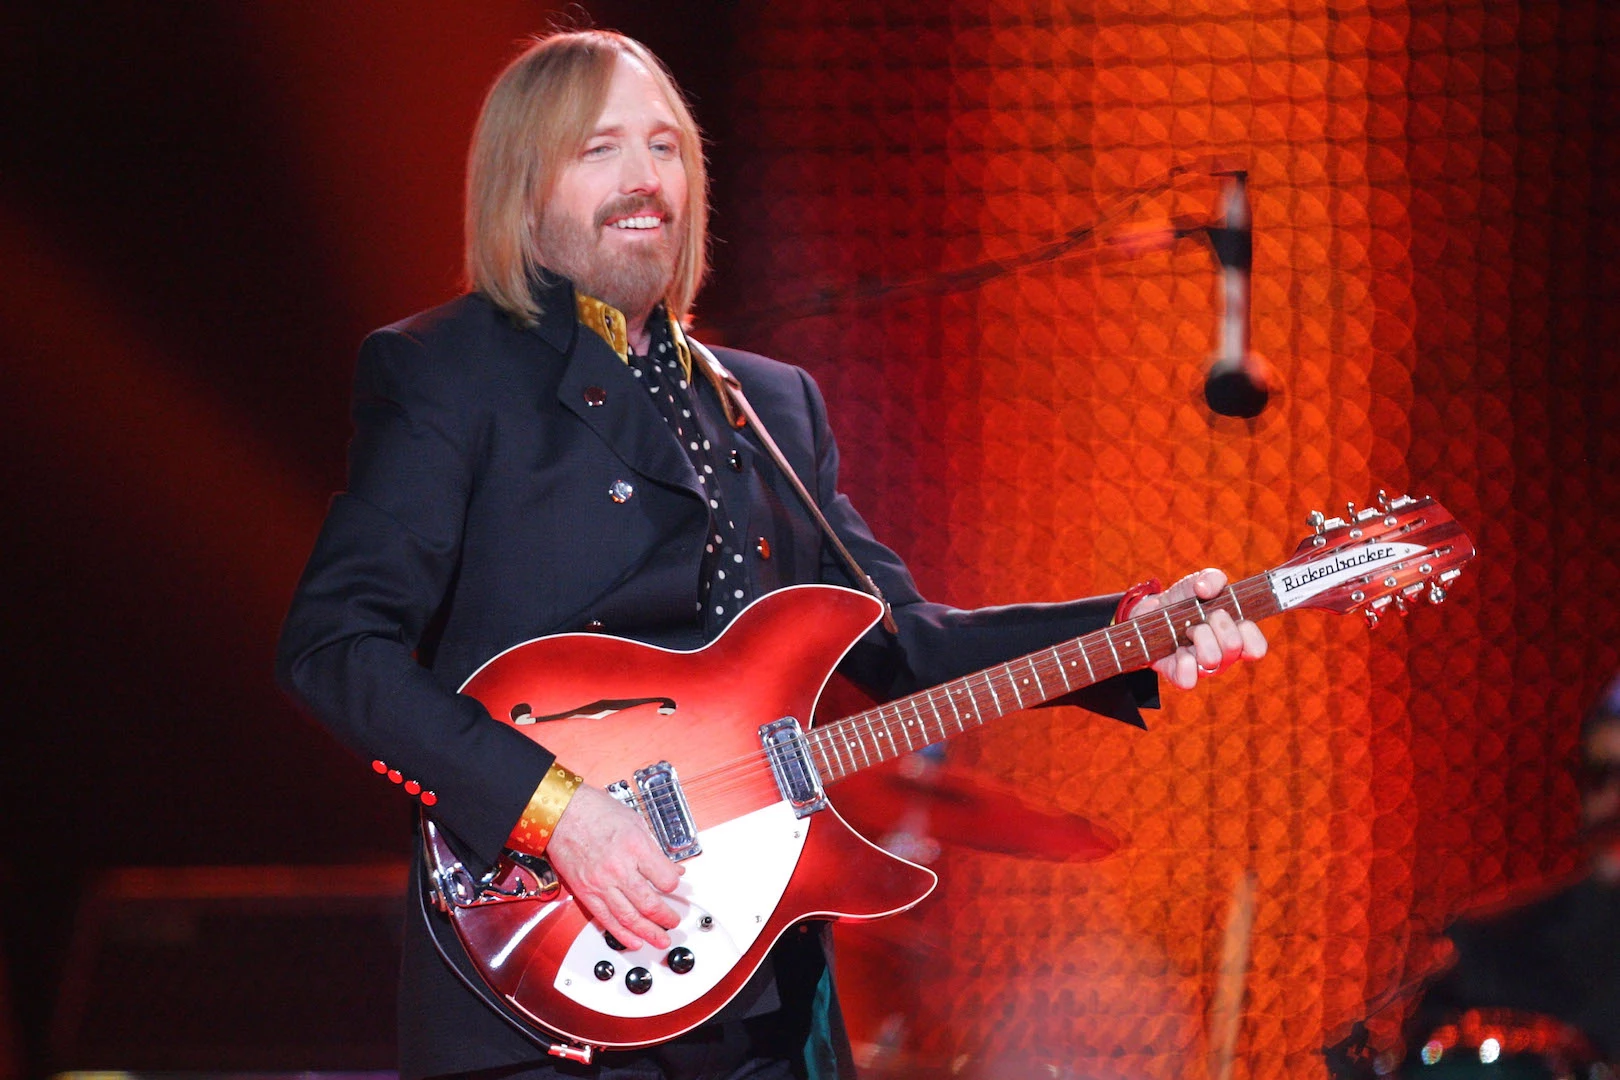 Tom Petty's Cause of Death: Accidental Pain Medication Overdose